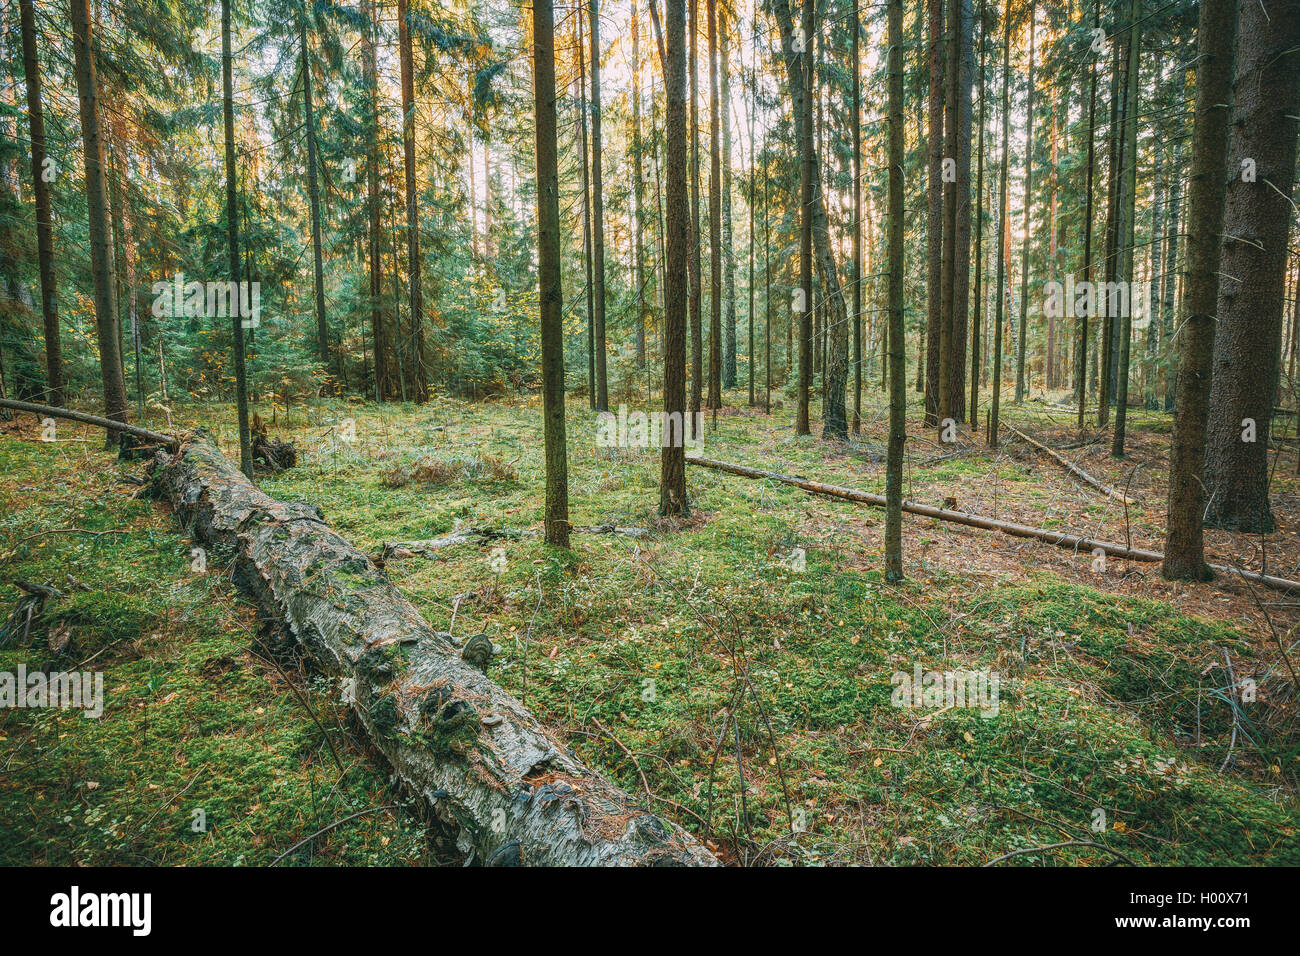 Wild Autumn Forest. Fallen Trees In Green Coniferous Forest Stock Photo